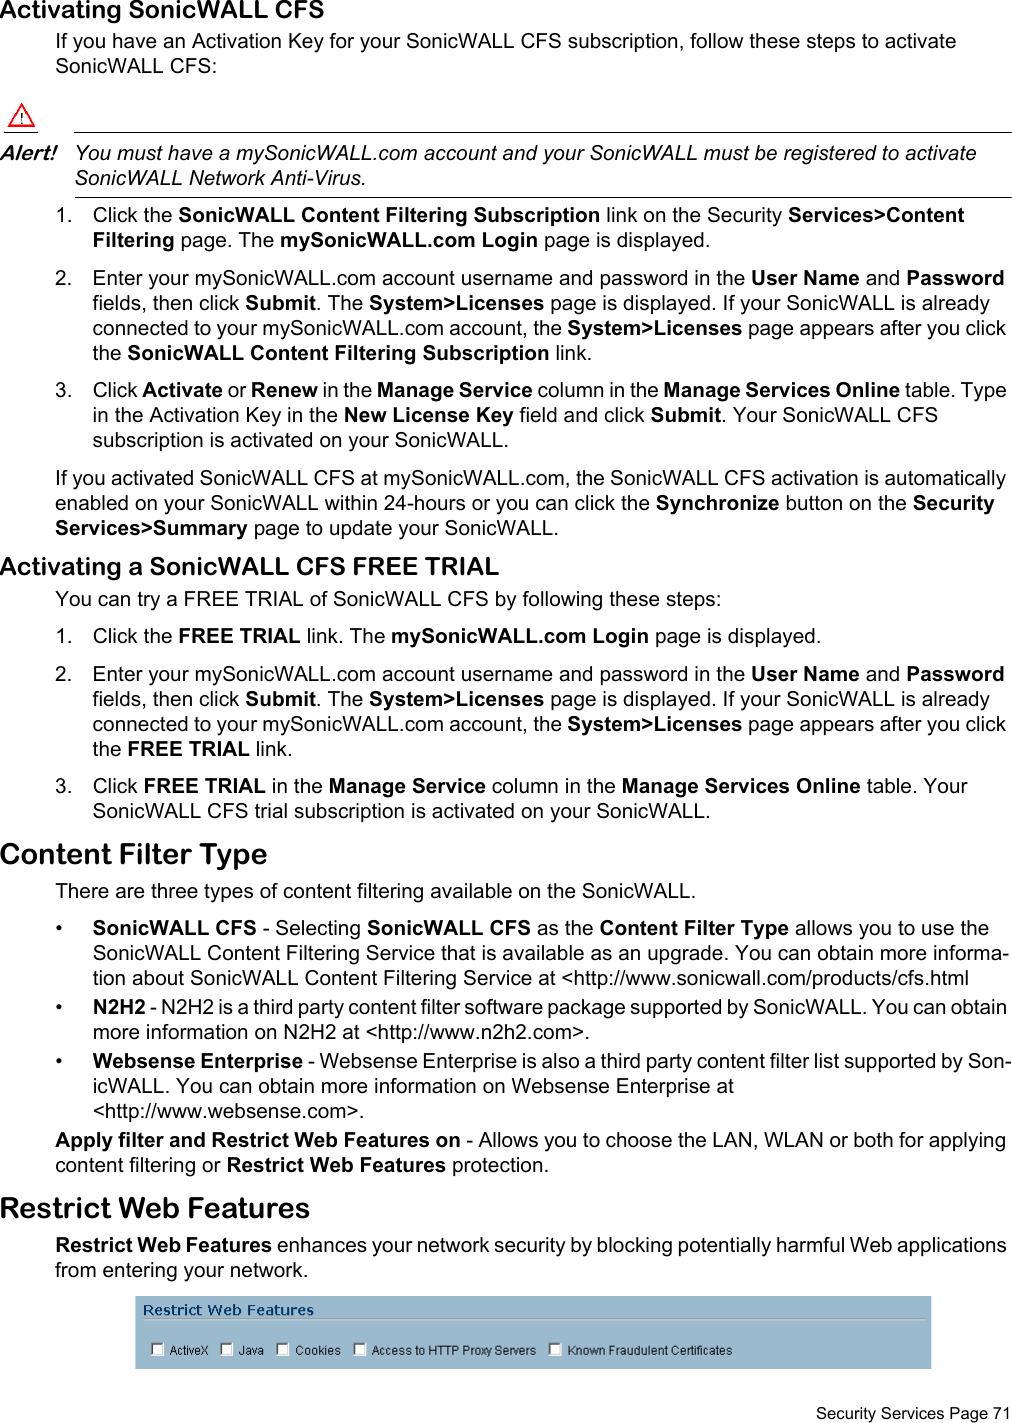  Security Services Page 71Activating SonicWALL CFSIf you have an Activation Key for your SonicWALL CFS subscription, follow these steps to activate SonicWALL CFS:Alert!You must have a mySonicWALL.com account and your SonicWALL must be registered to activate SonicWALL Network Anti-Virus.1. Click the SonicWALL Content Filtering Subscription link on the Security Services&gt;Content Filtering page. The mySonicWALL.com Login page is displayed. 2. Enter your mySonicWALL.com account username and password in the User Name and Password fields, then click Submit. The System&gt;Licenses page is displayed. If your SonicWALL is already connected to your mySonicWALL.com account, the System&gt;Licenses page appears after you click the SonicWALL Content Filtering Subscription link. 3. Click Activate or Renew in the Manage Service column in the Manage Services Online table. Type in the Activation Key in the New License Key field and click Submit. Your SonicWALL CFS subscription is activated on your SonicWALL.If you activated SonicWALL CFS at mySonicWALL.com, the SonicWALL CFS activation is automatically enabled on your SonicWALL within 24-hours or you can click the Synchronize button on the Security Services&gt;Summary page to update your SonicWALL.Activating a SonicWALL CFS FREE TRIALYou can try a FREE TRIAL of SonicWALL CFS by following these steps:1. Click the FREE TRIAL link. The mySonicWALL.com Login page is displayed. 2. Enter your mySonicWALL.com account username and password in the User Name and Password fields, then click Submit. The System&gt;Licenses page is displayed. If your SonicWALL is already connected to your mySonicWALL.com account, the System&gt;Licenses page appears after you click the FREE TRIAL link.3. Click FREE TRIAL in the Manage Service column in the Manage Services Online table. Your SonicWALL CFS trial subscription is activated on your SonicWALL.Content Filter TypeThere are three types of content filtering available on the SonicWALL. •SonicWALL CFS - Selecting SonicWALL CFS as the Content Filter Type allows you to use the SonicWALL Content Filtering Service that is available as an upgrade. You can obtain more informa-tion about SonicWALL Content Filtering Service at &lt;http://www.sonicwall.com/products/cfs.html•N2H2 - N2H2 is a third party content filter software package supported by SonicWALL. You can obtain more information on N2H2 at &lt;http://www.n2h2.com&gt;. •Websense Enterprise - Websense Enterprise is also a third party content filter list supported by Son-icWALL. You can obtain more information on Websense Enterprise at &lt;http://www.websense.com&gt;. Apply filter and Restrict Web Features on - Allows you to choose the LAN, WLAN or both for applying content filtering or Restrict Web Features protection.Restrict Web FeaturesRestrict Web Features enhances your network security by blocking potentially harmful Web applications from entering your network. 